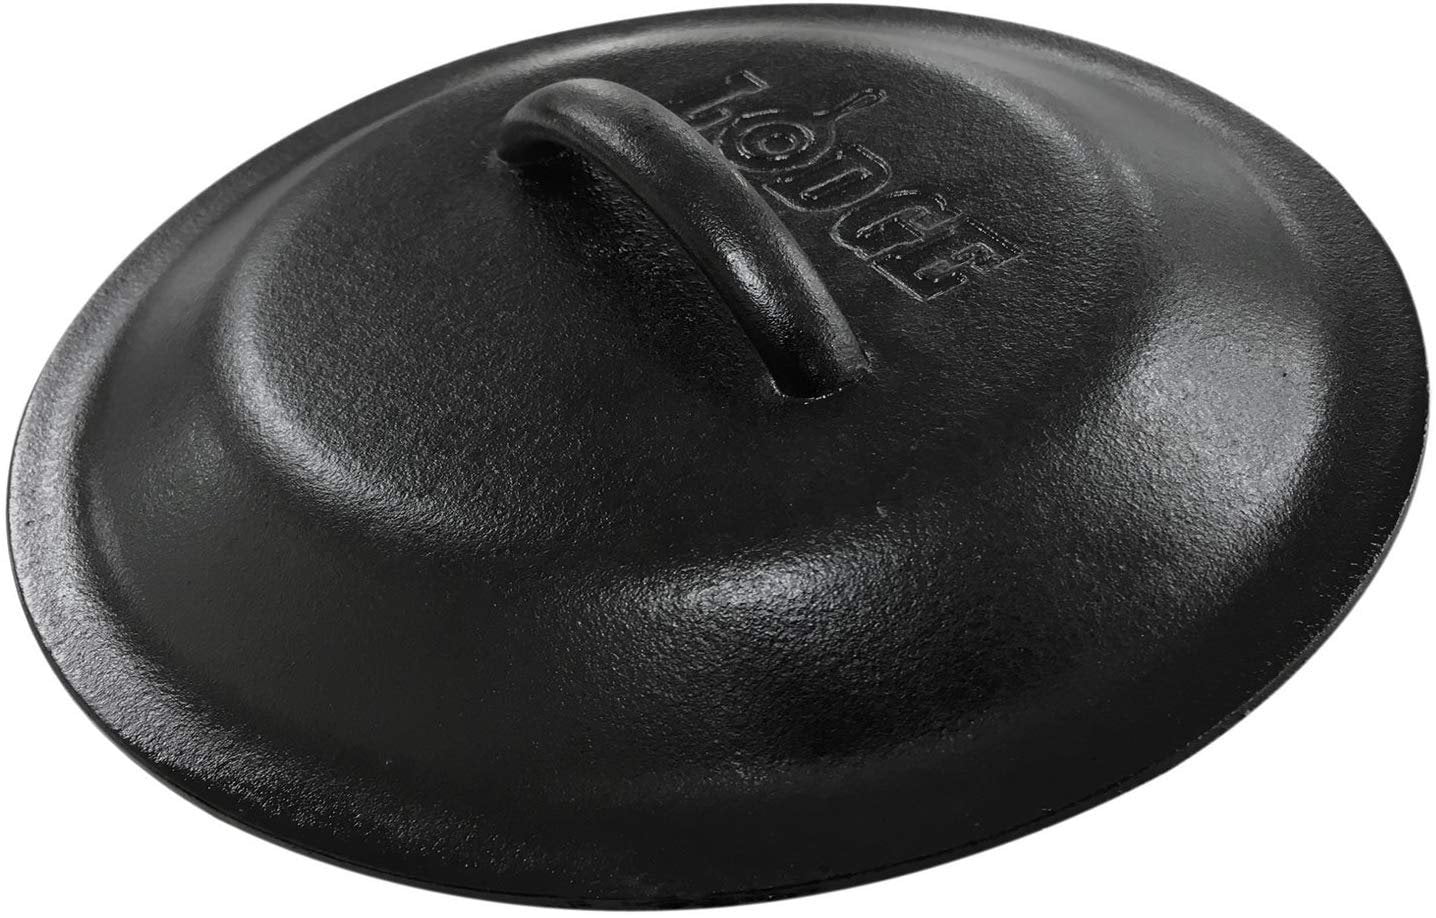 Get your Lodge® 10-1/4 Cast Iron Skillet Lid at Smith & Edwards!